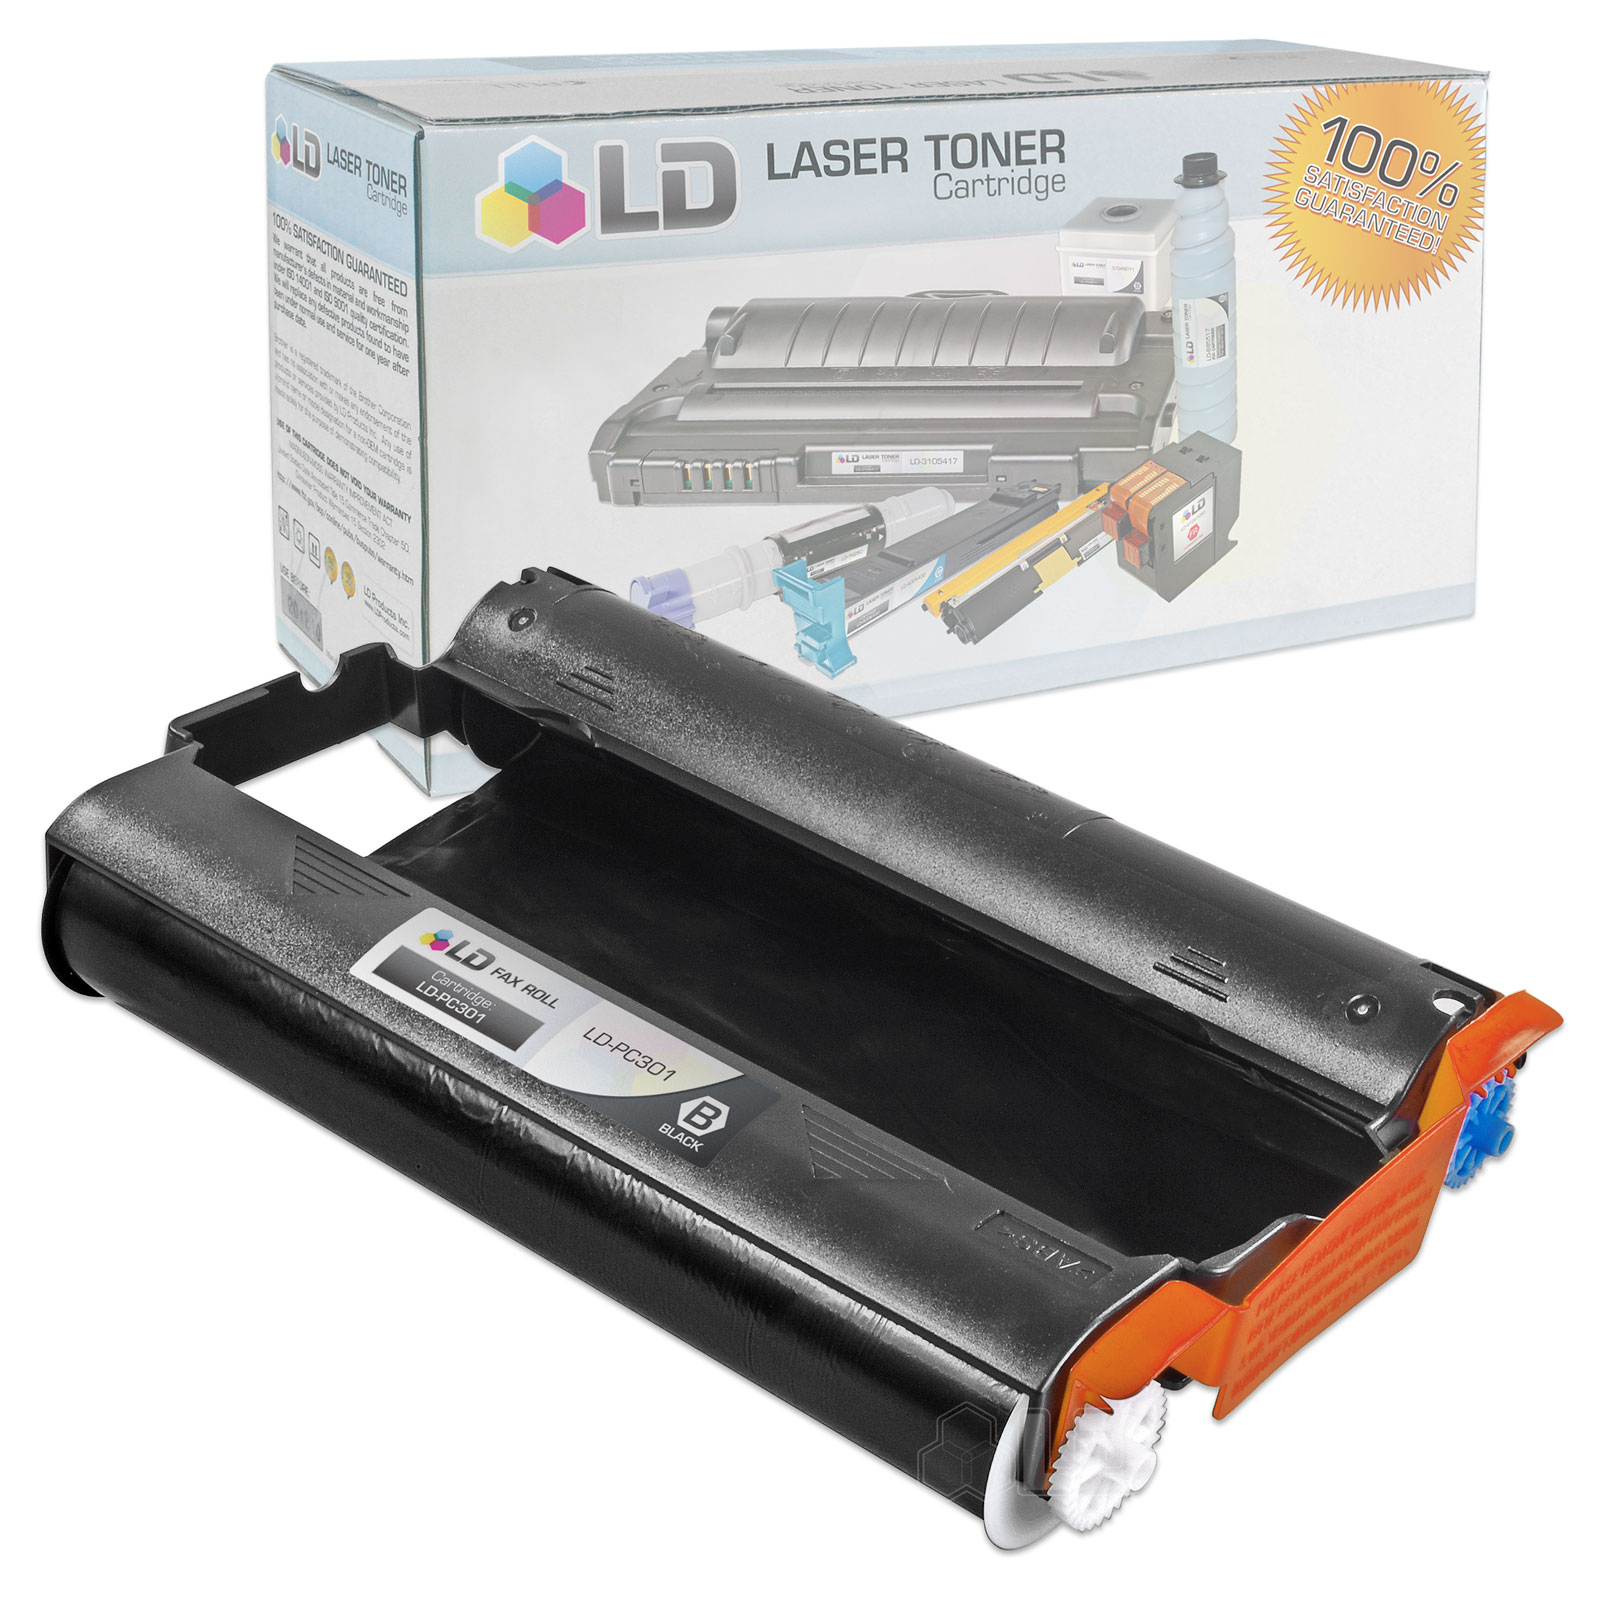 LD Compatible Replacement for PC301 Fax Cartridge With Roll for use in FAX 885MC, Intellifax 750, 770, 775, 870MC, 885MC, and MFC-970MC Printers - image 1 of 1